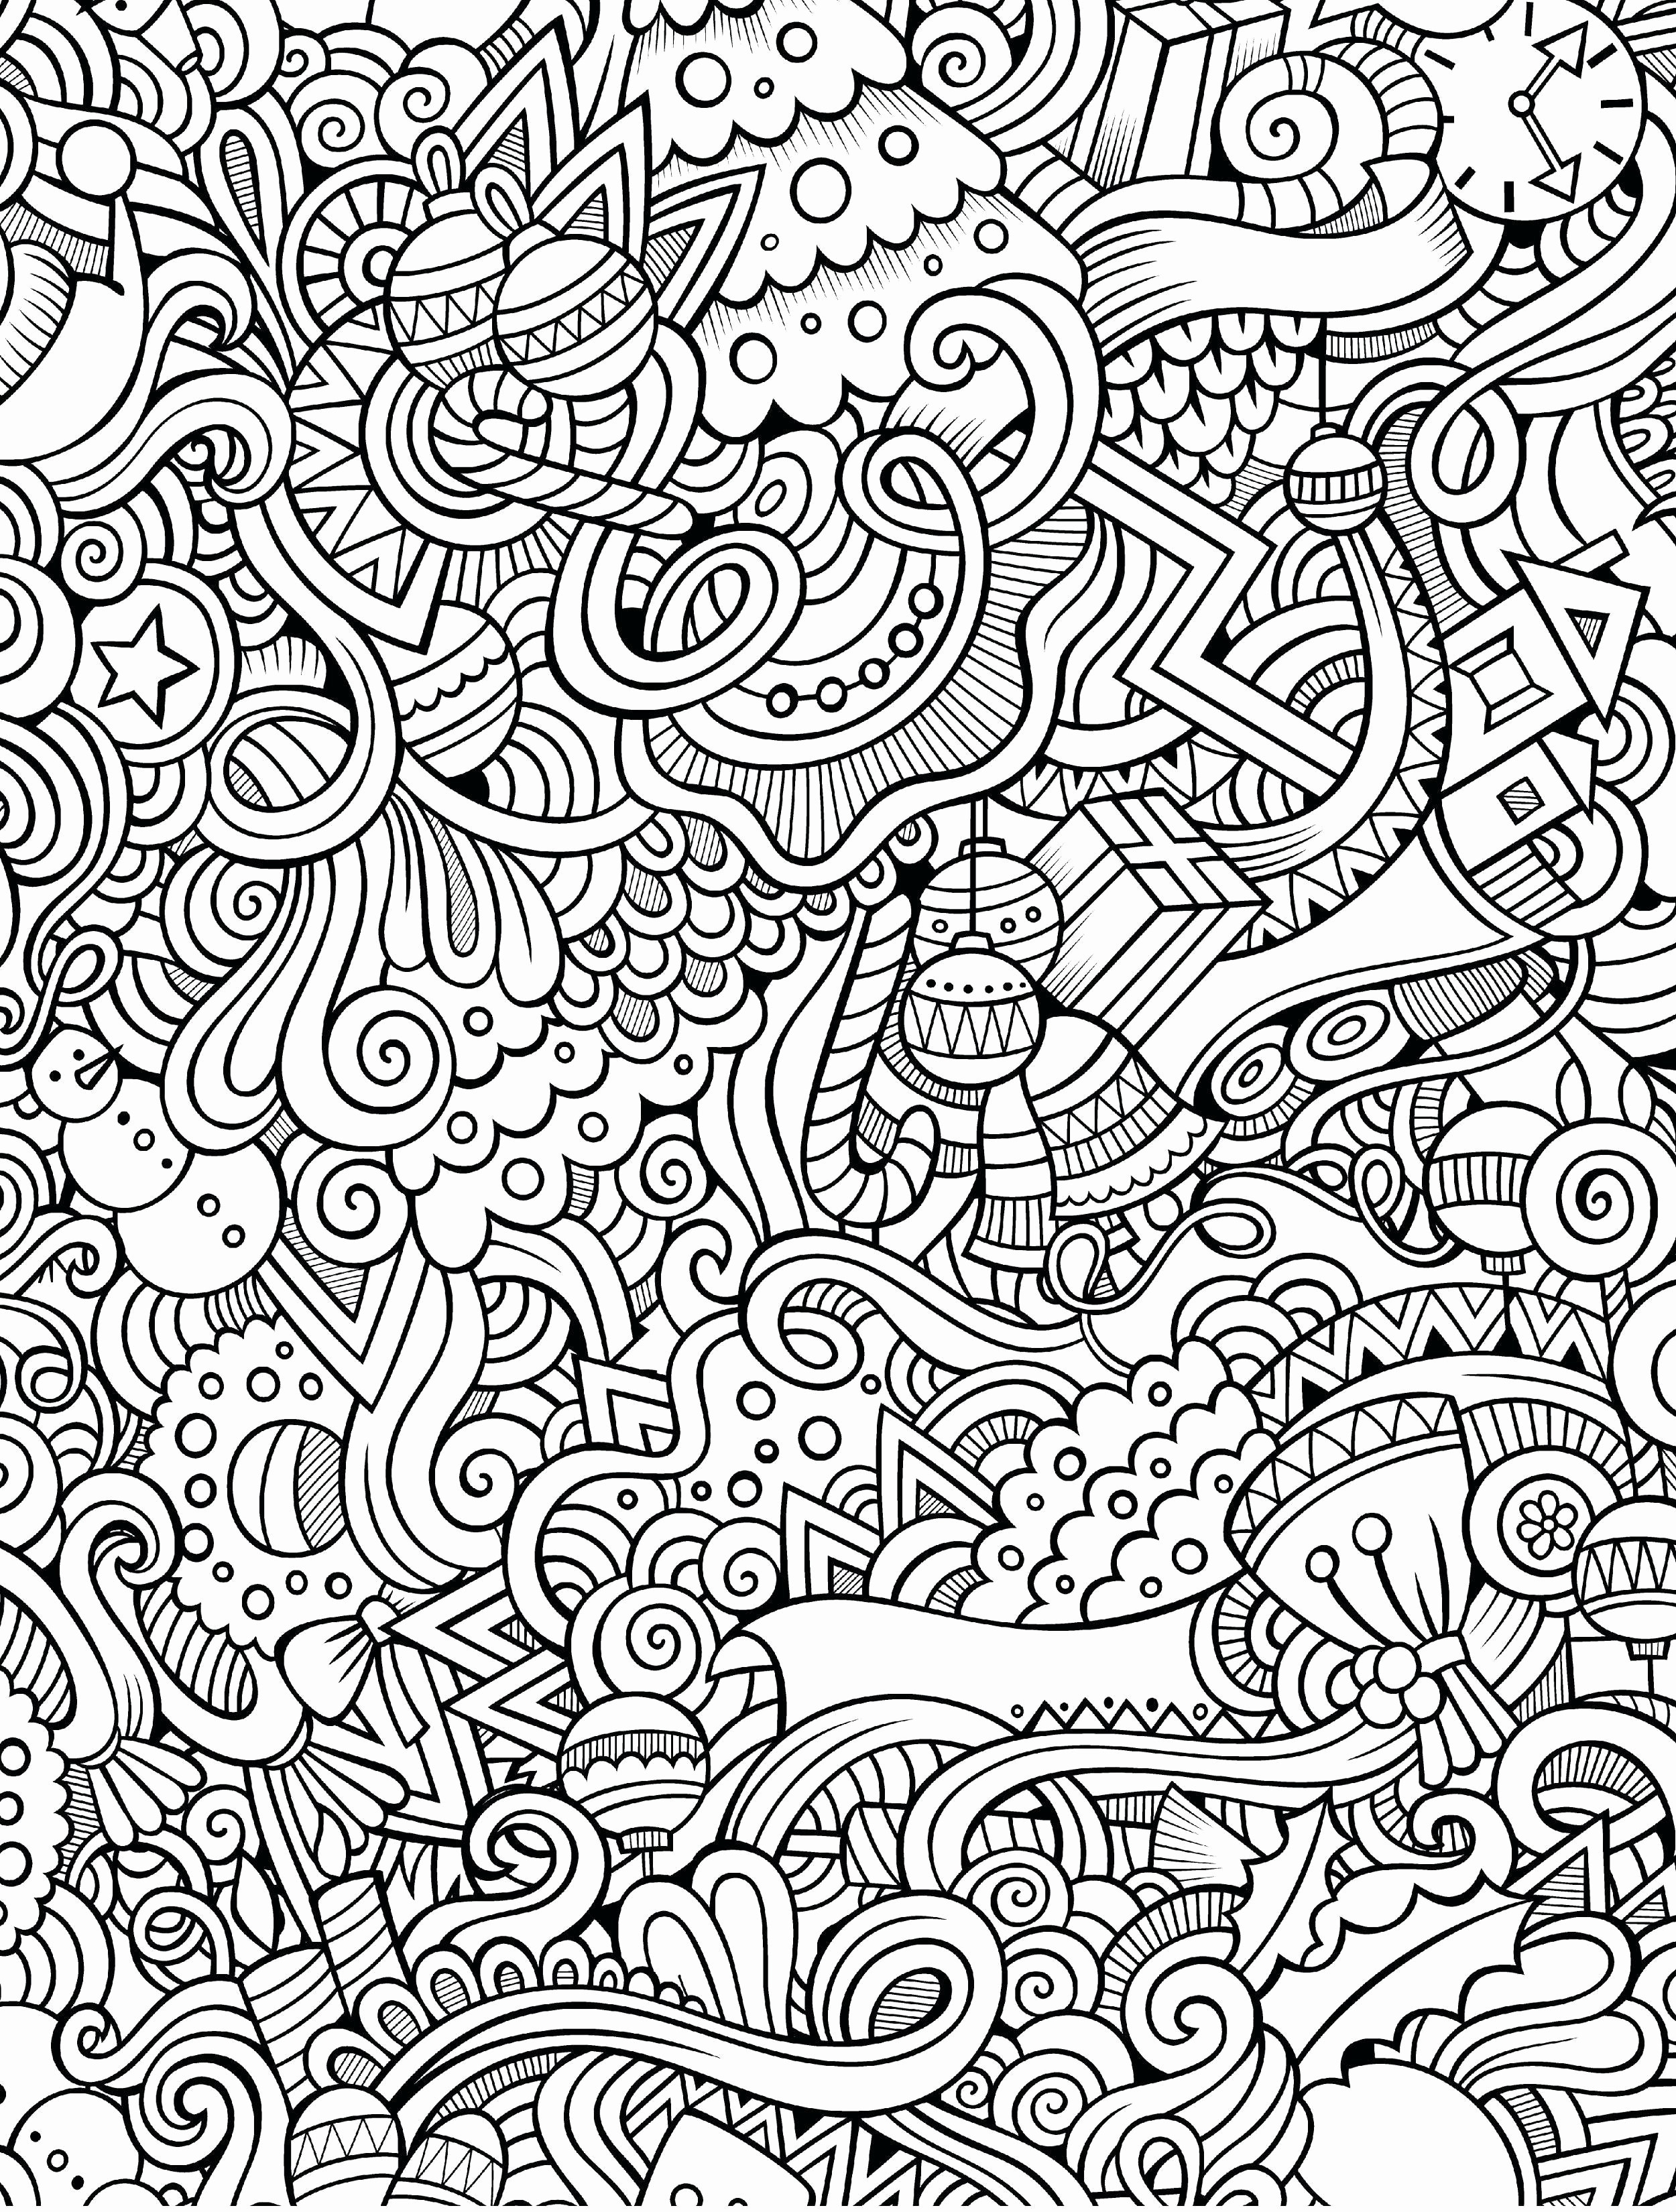 21 Lovable Peacock Feathers In Vase 2024 free download peacock feathers in vase of peacock coloring page advanced peacock coloring pages new printable with peacock coloring page full size coloring pages for adults unique awesome coloring page fo